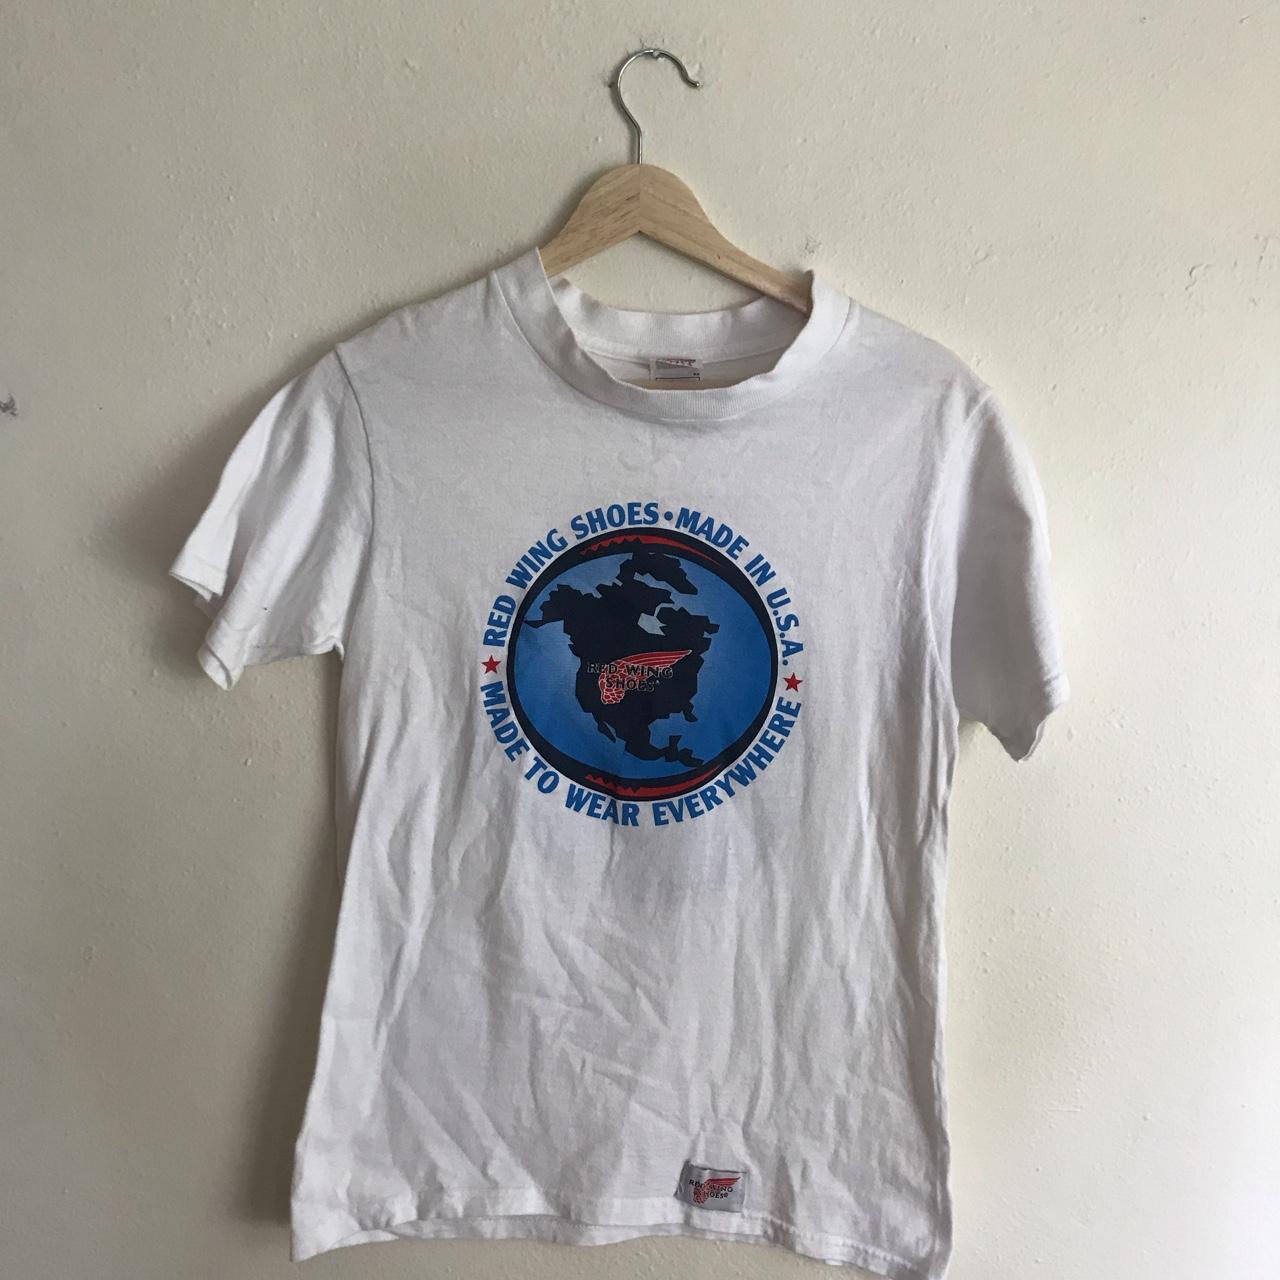 Red wing shoes t shirt Size large Flaws are it's - Depop